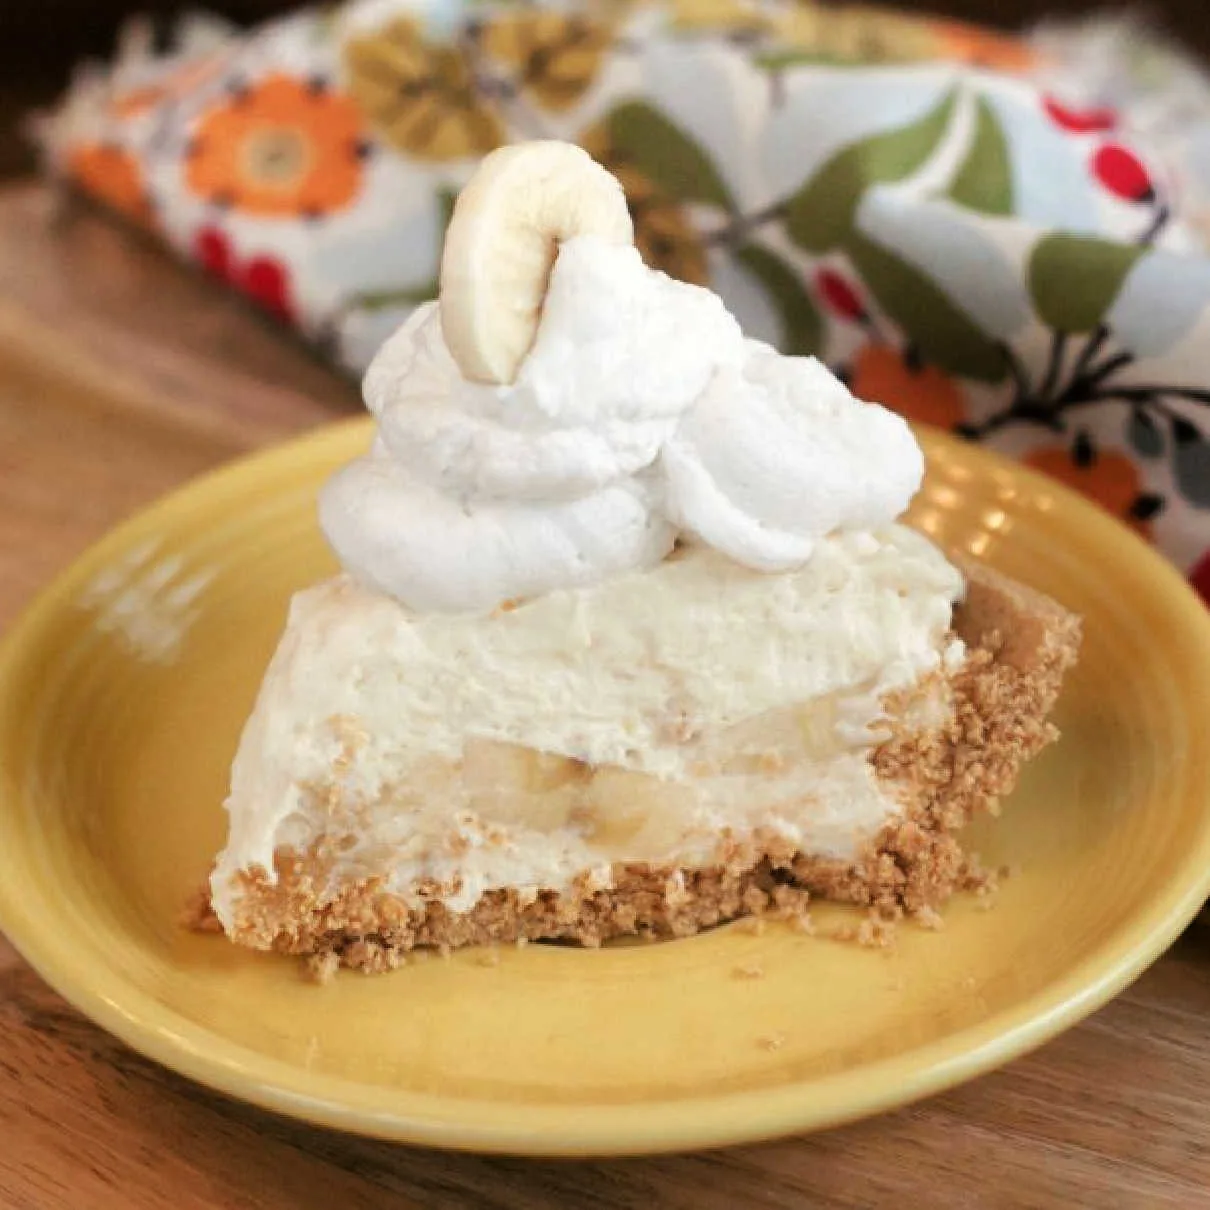 Slice of no cook banana cream pie with a pile of whipped cream on top on a yellow plate.